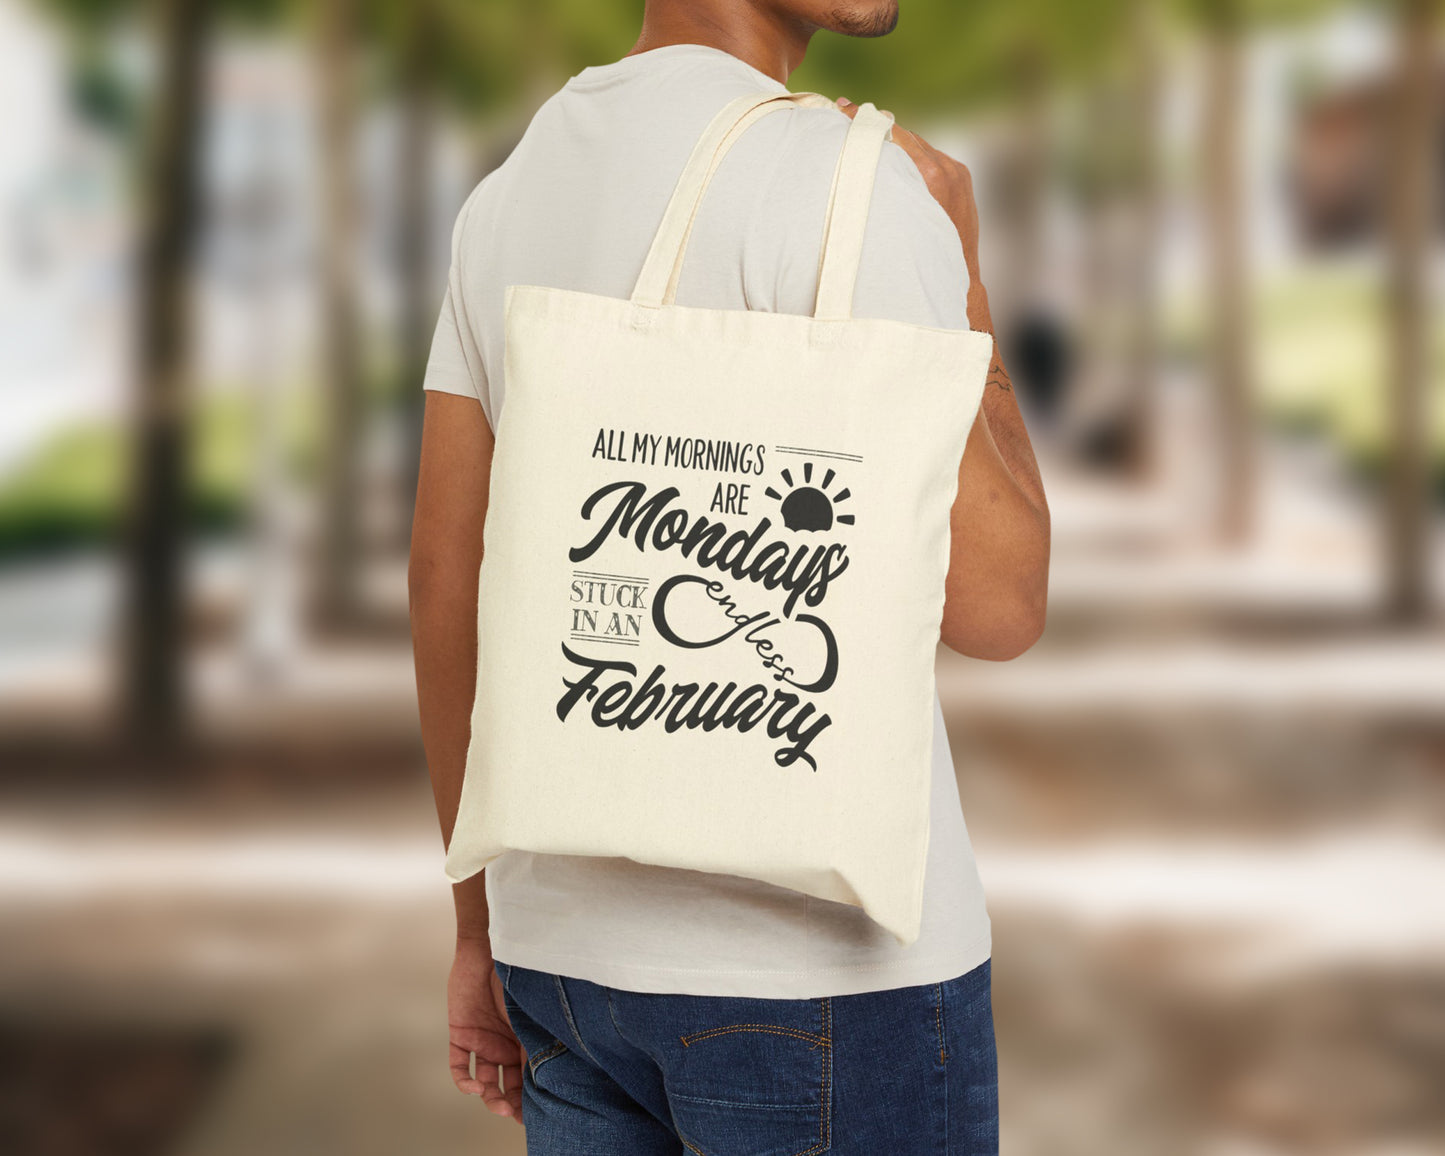 All my mornings are Mondays stuck in an endless February cotton canvas tote bag